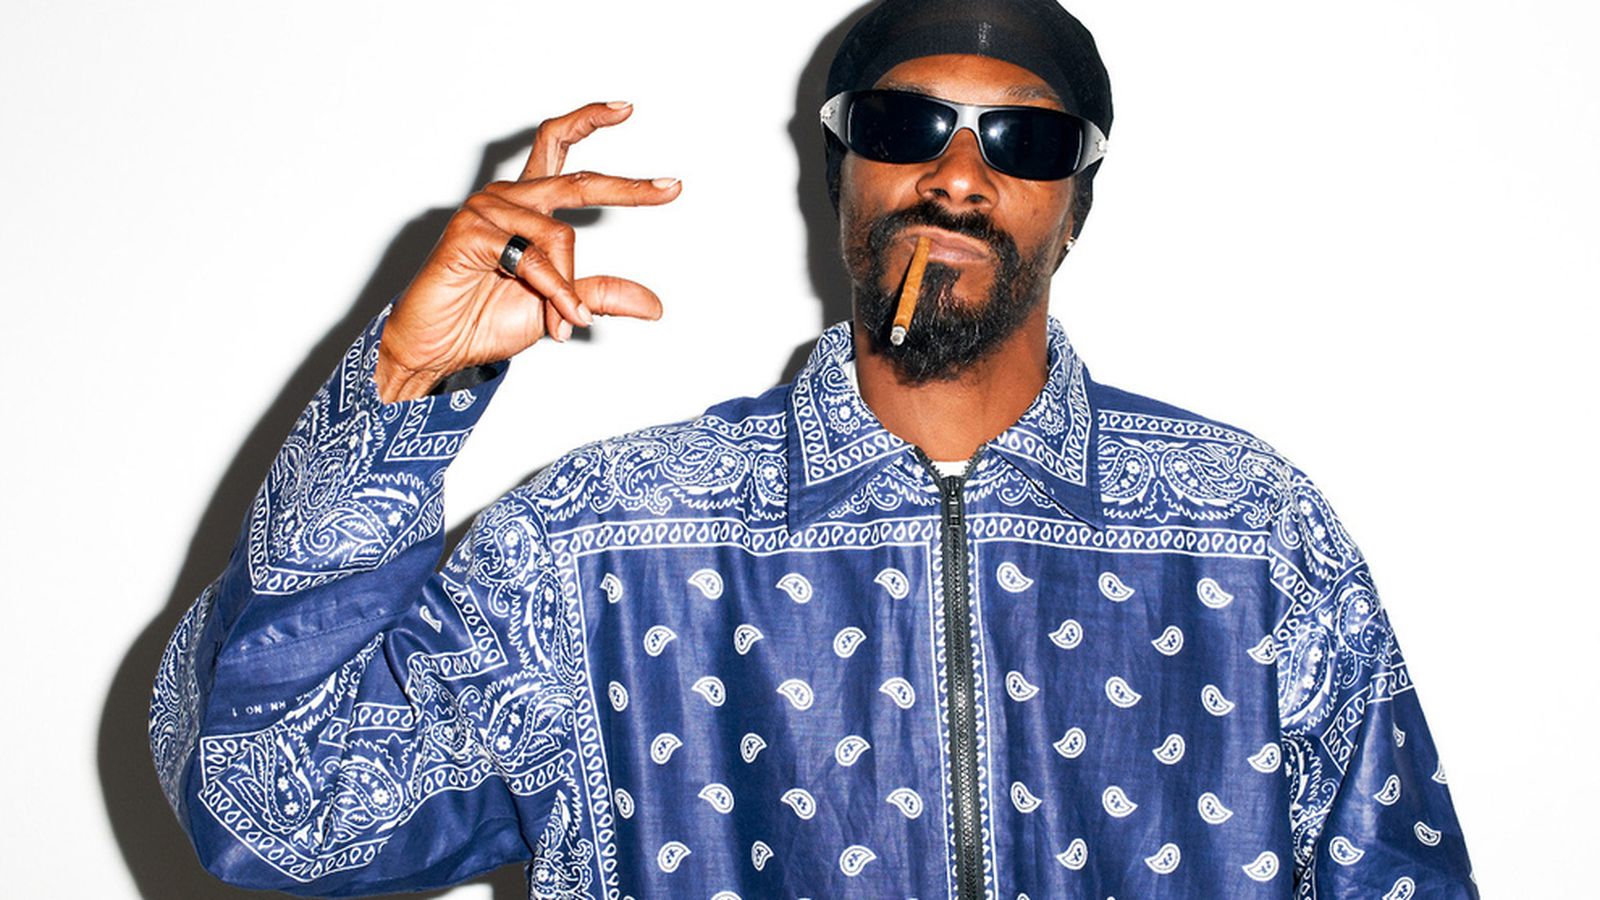 The Source |Snoop Dogg Apparently Got Harassed By Bloods On Set Of 'Training Day'